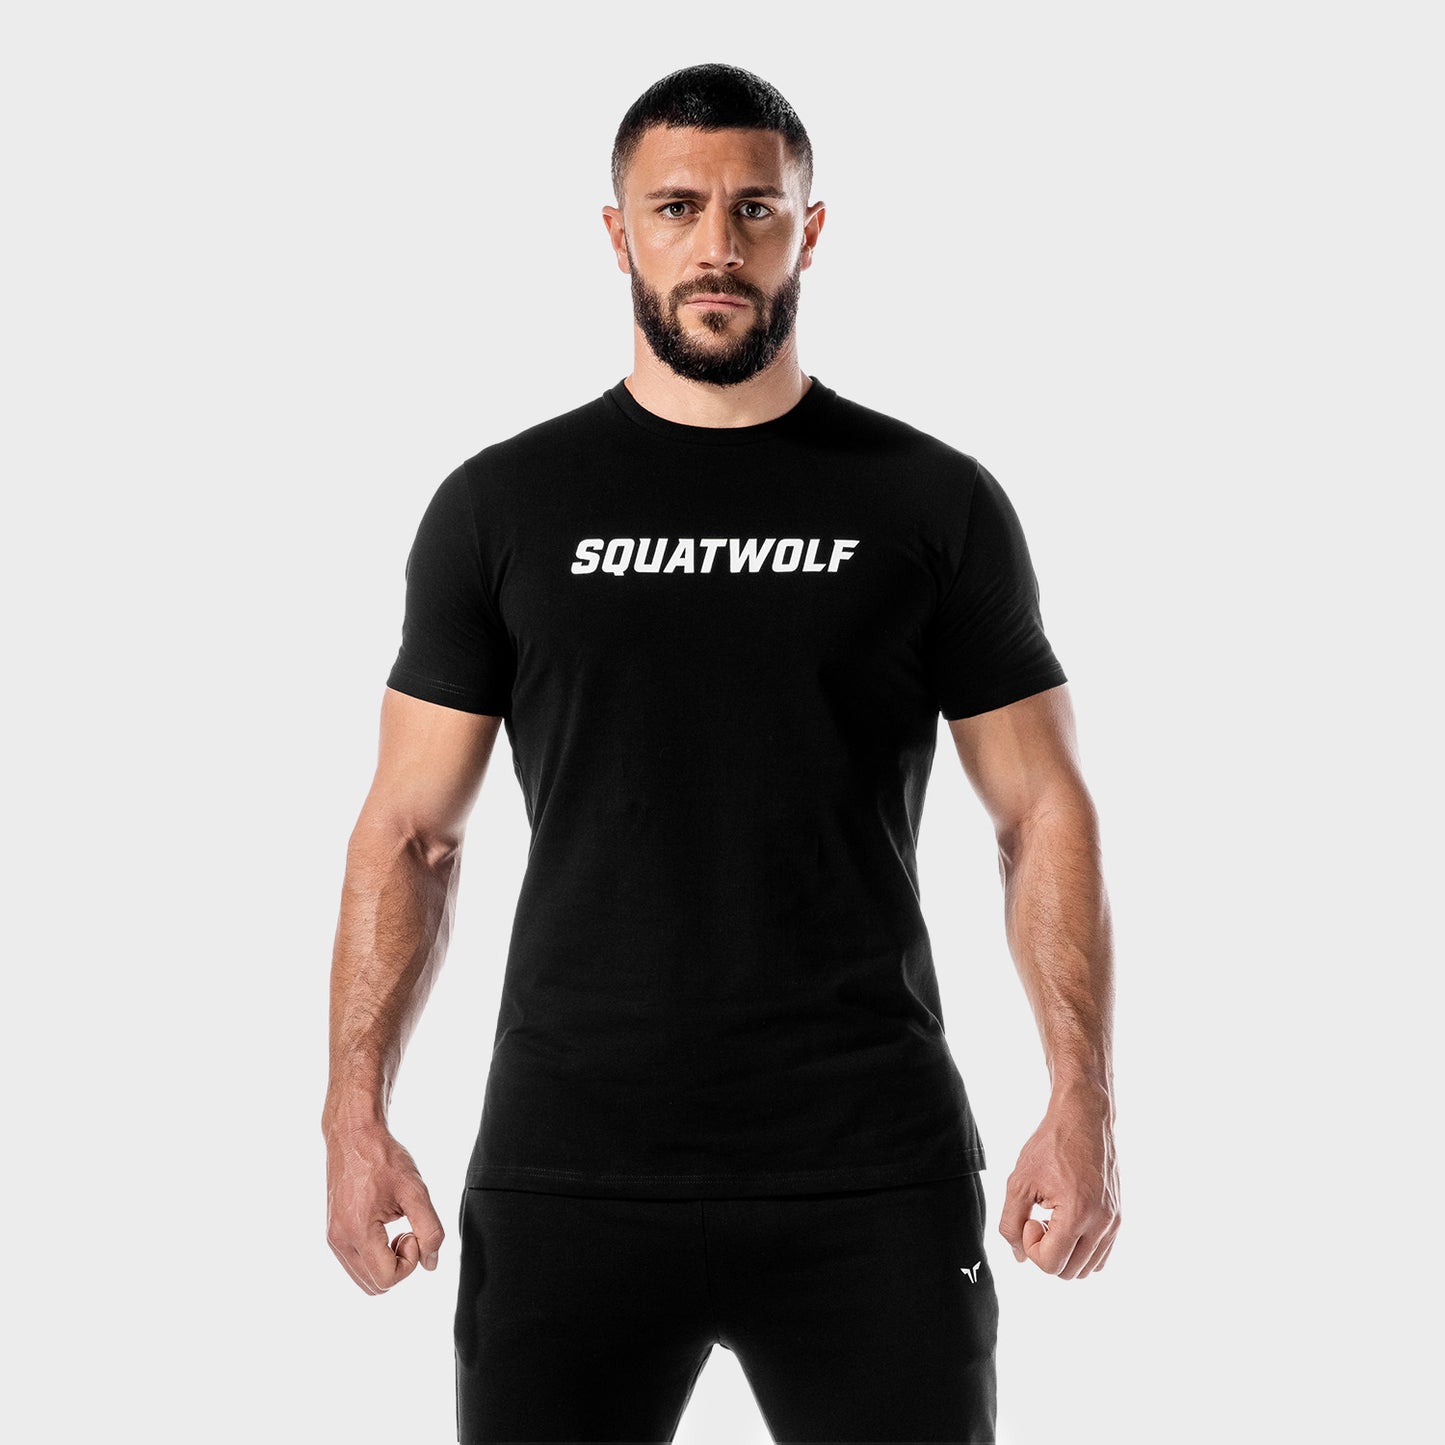 squatwolf-gym-wear-iconic-muscle-tee-black-workout-shirts-for-men